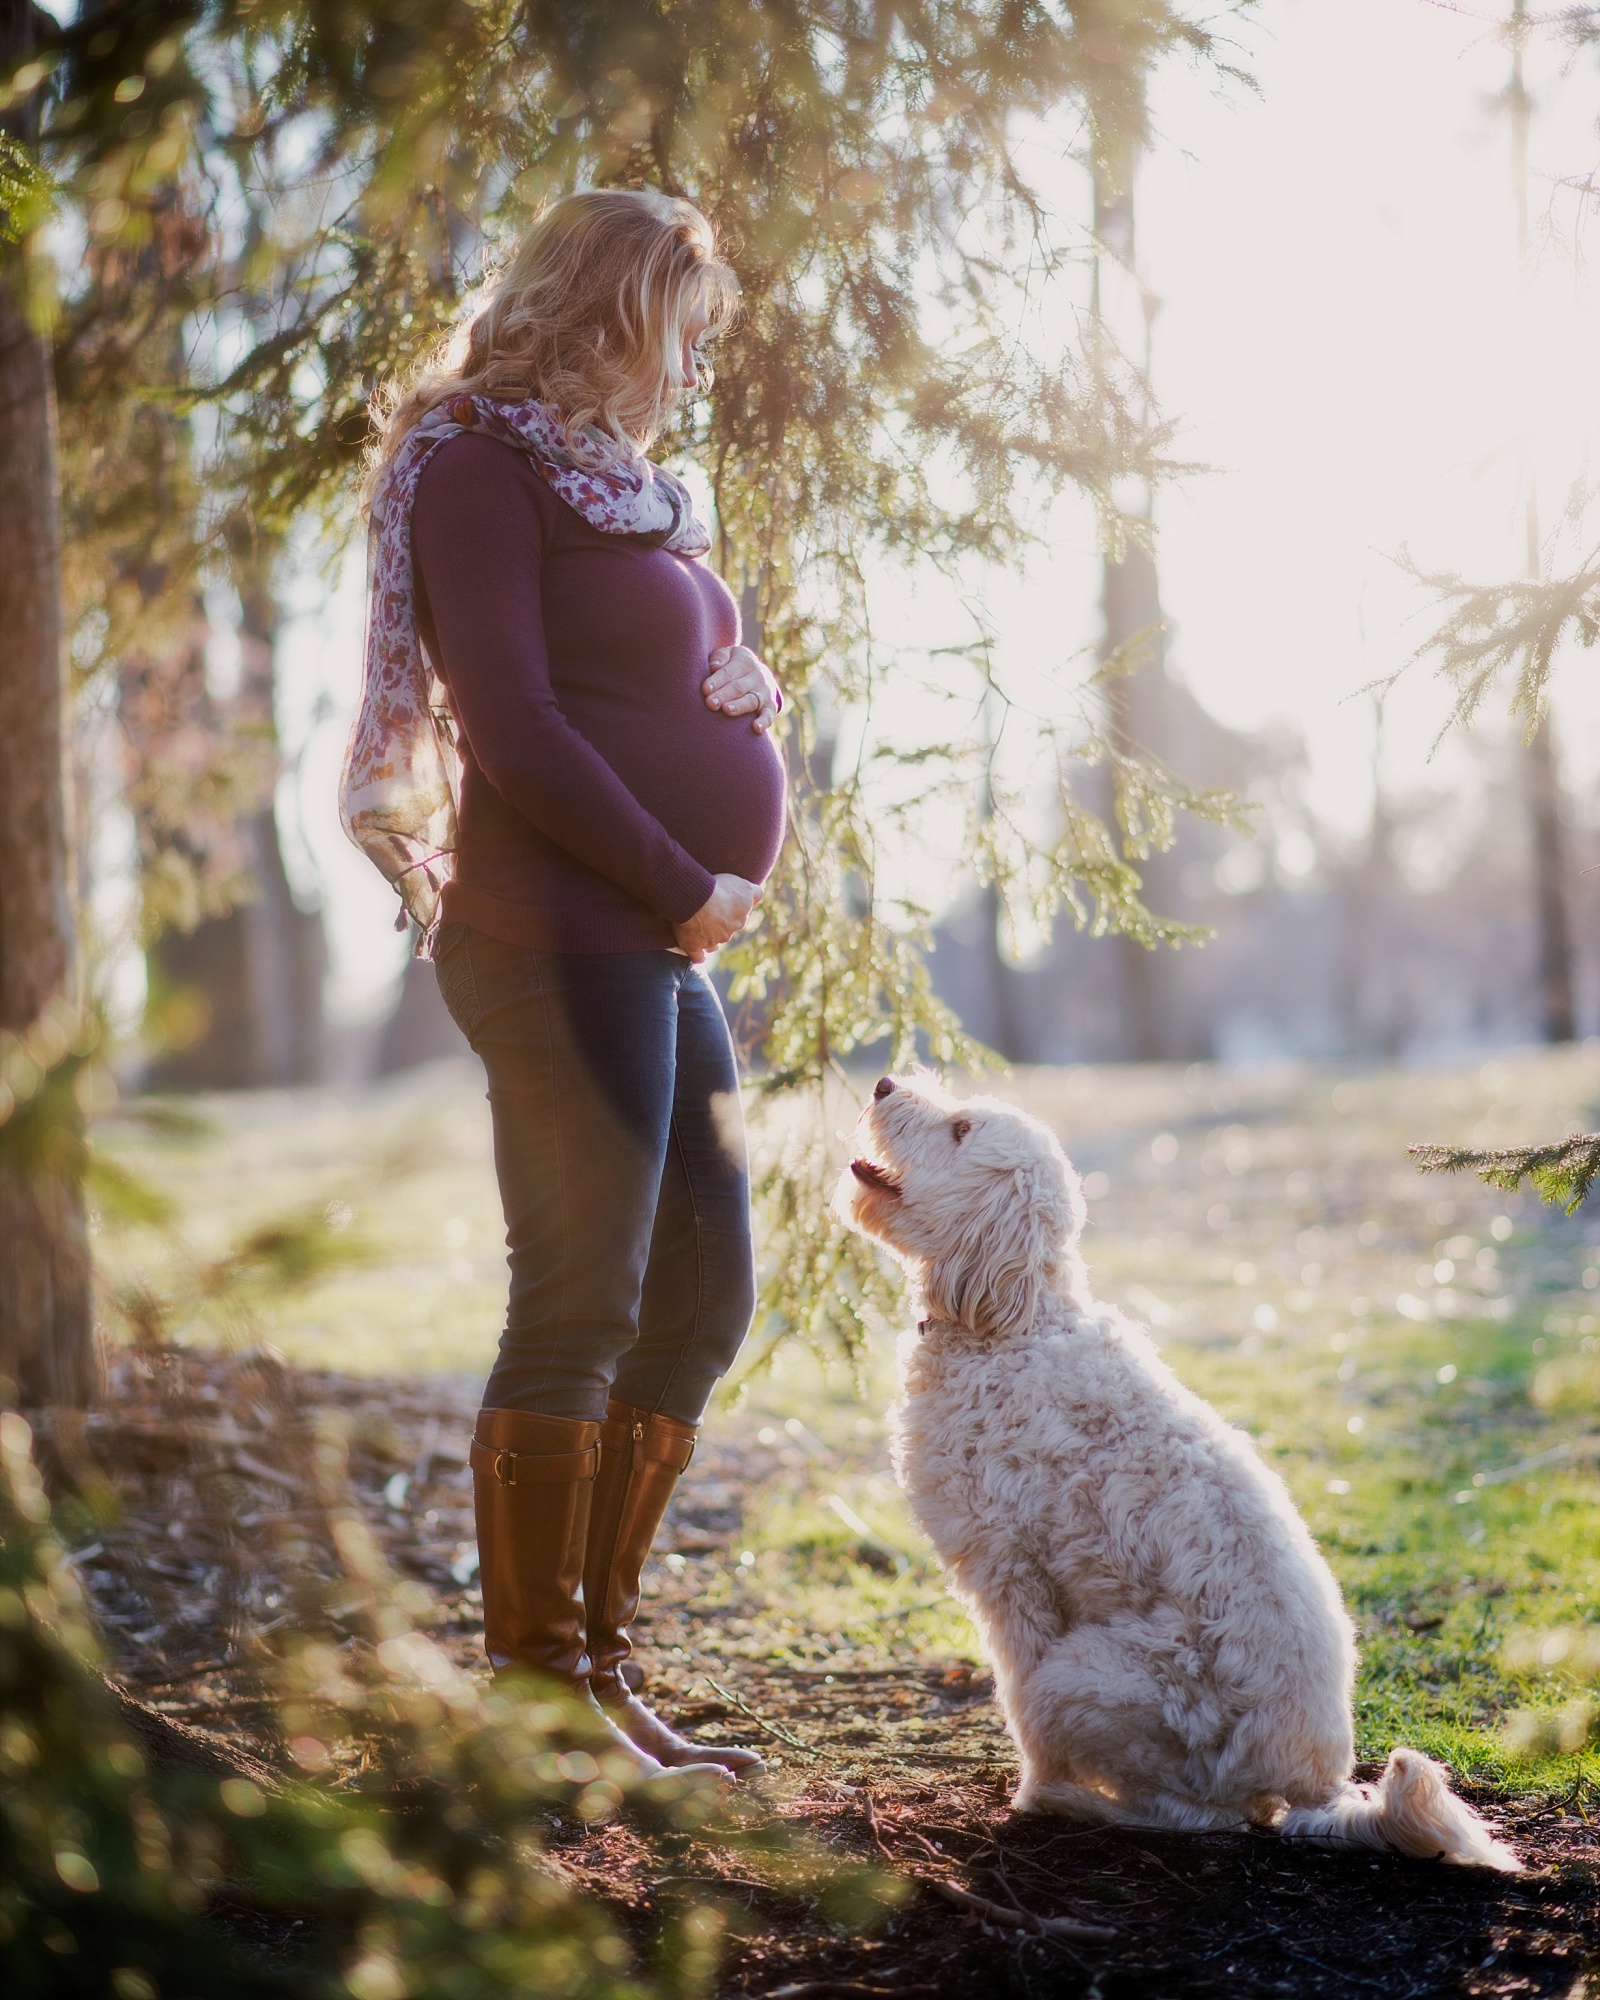 Maternity Portraits with a dog at Cherry Hill Park in Falls Church, VA